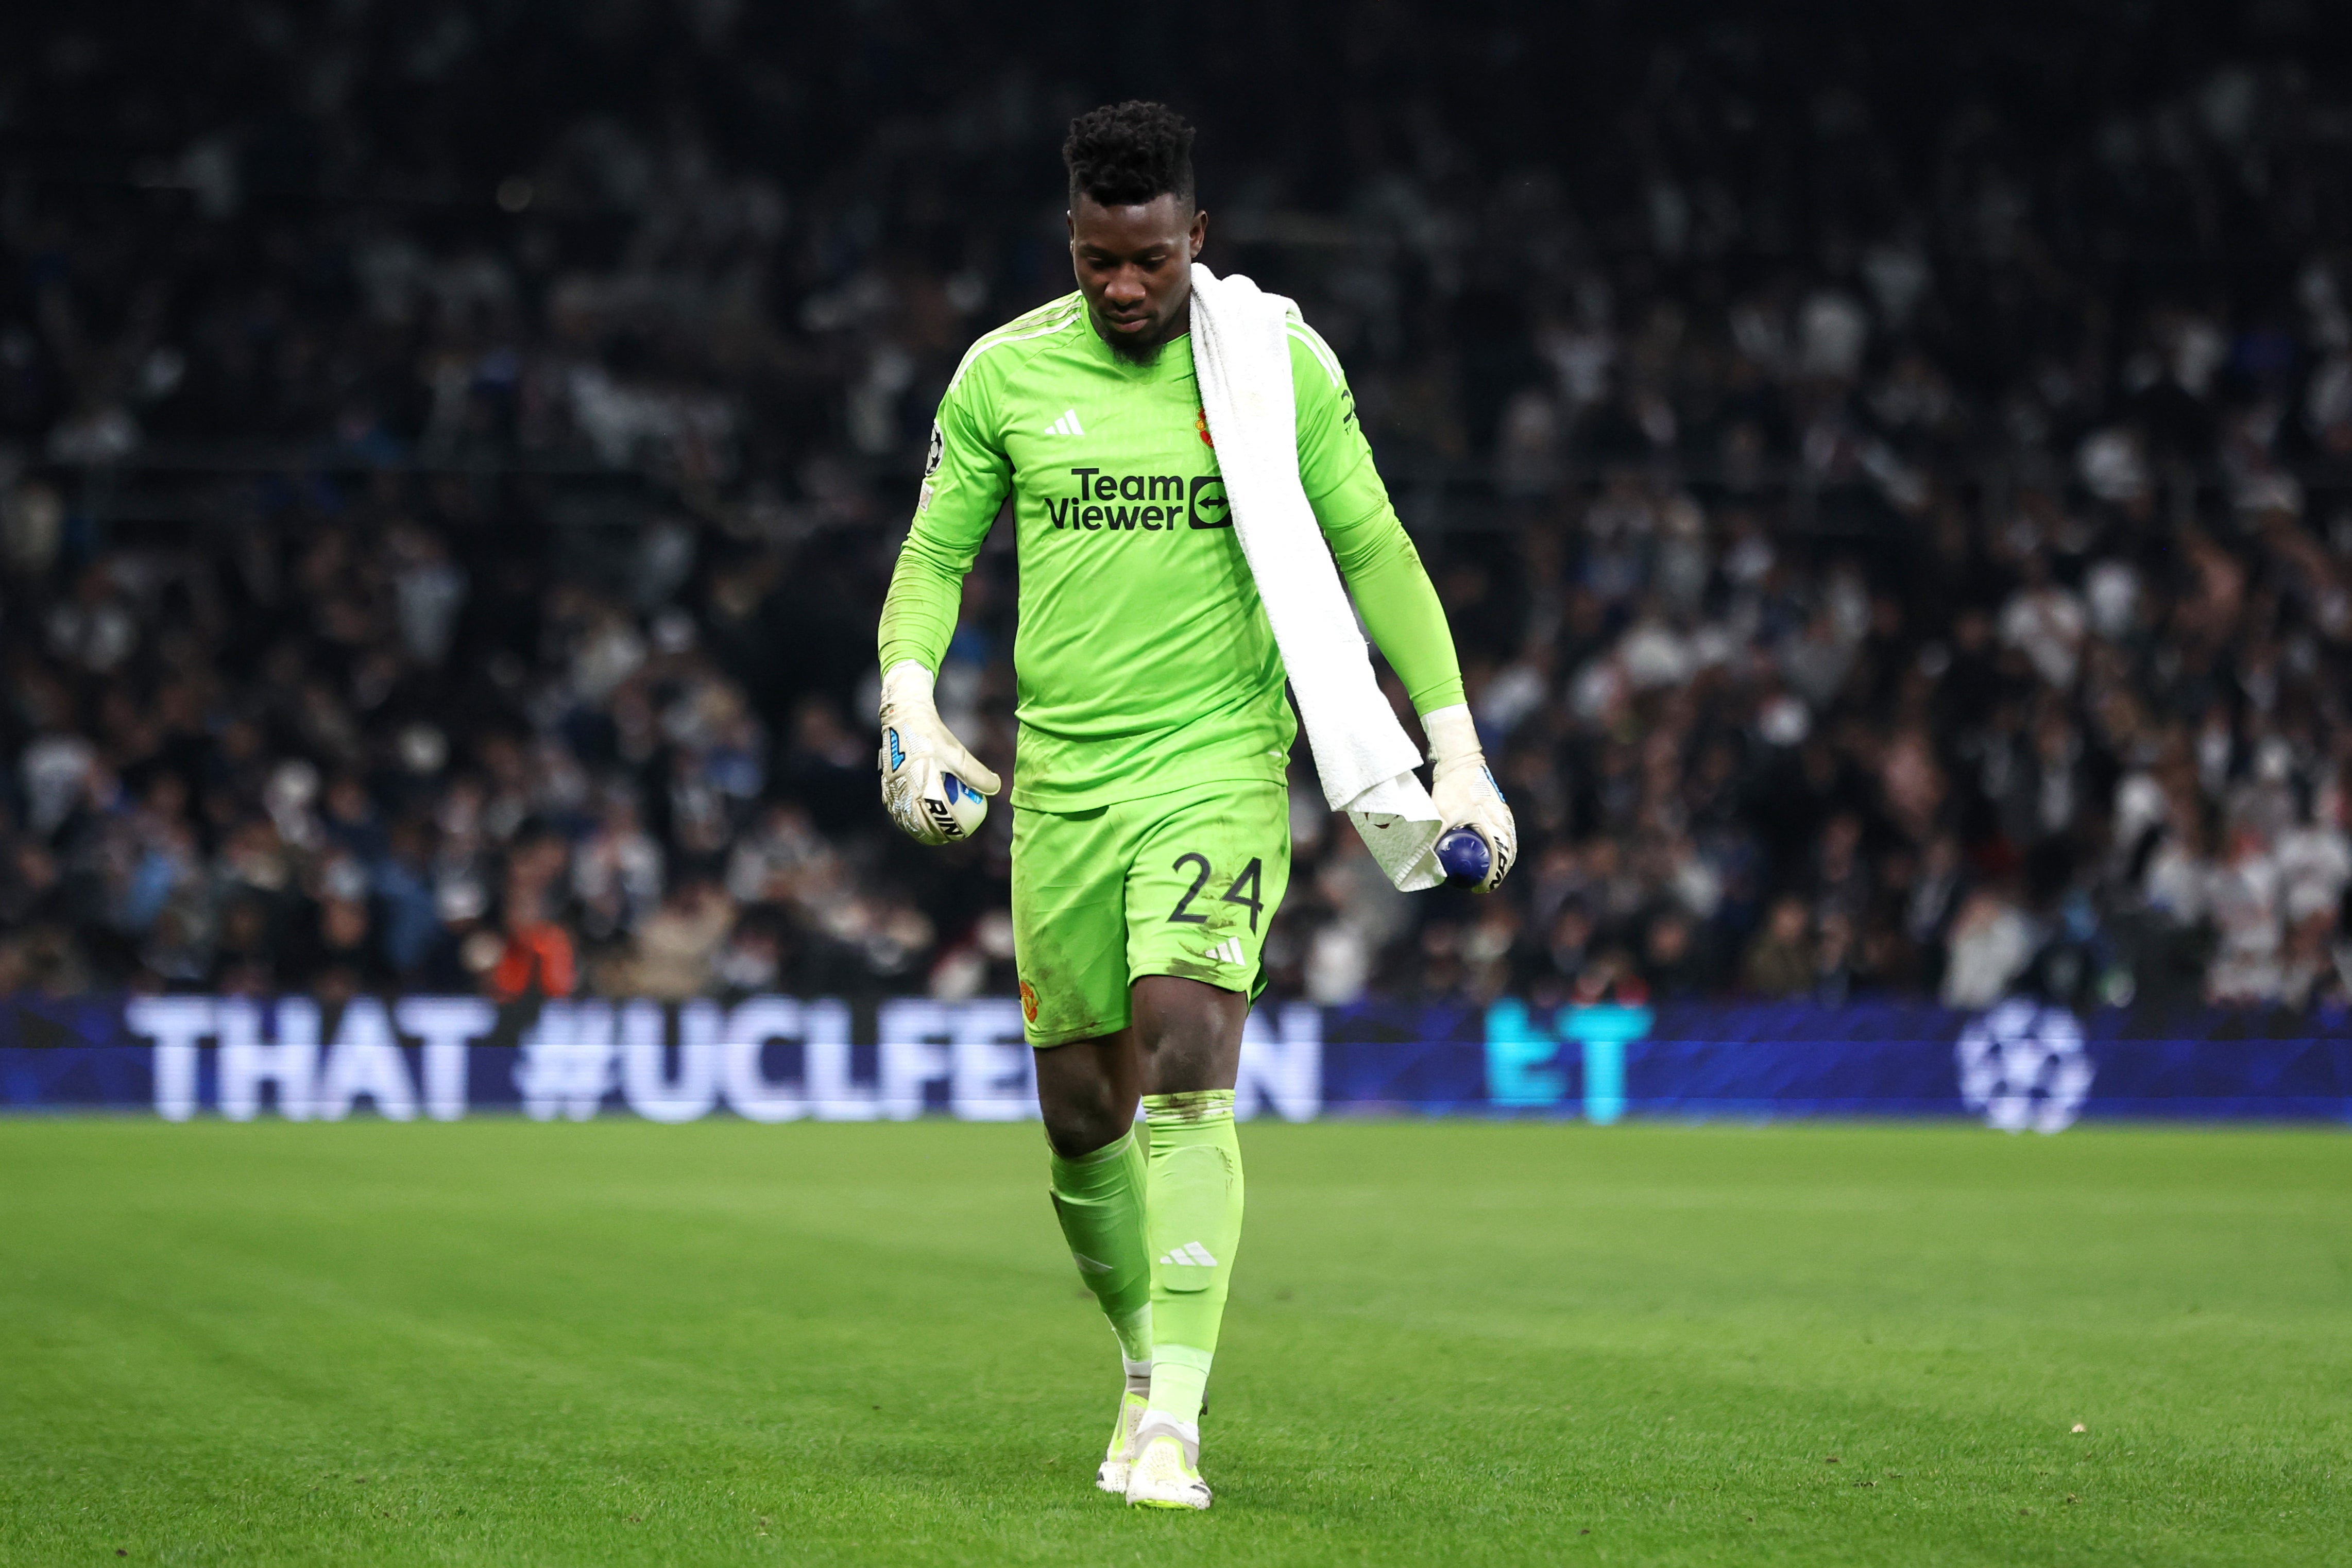 Andre Onana has struggled since arriving at Manchester United